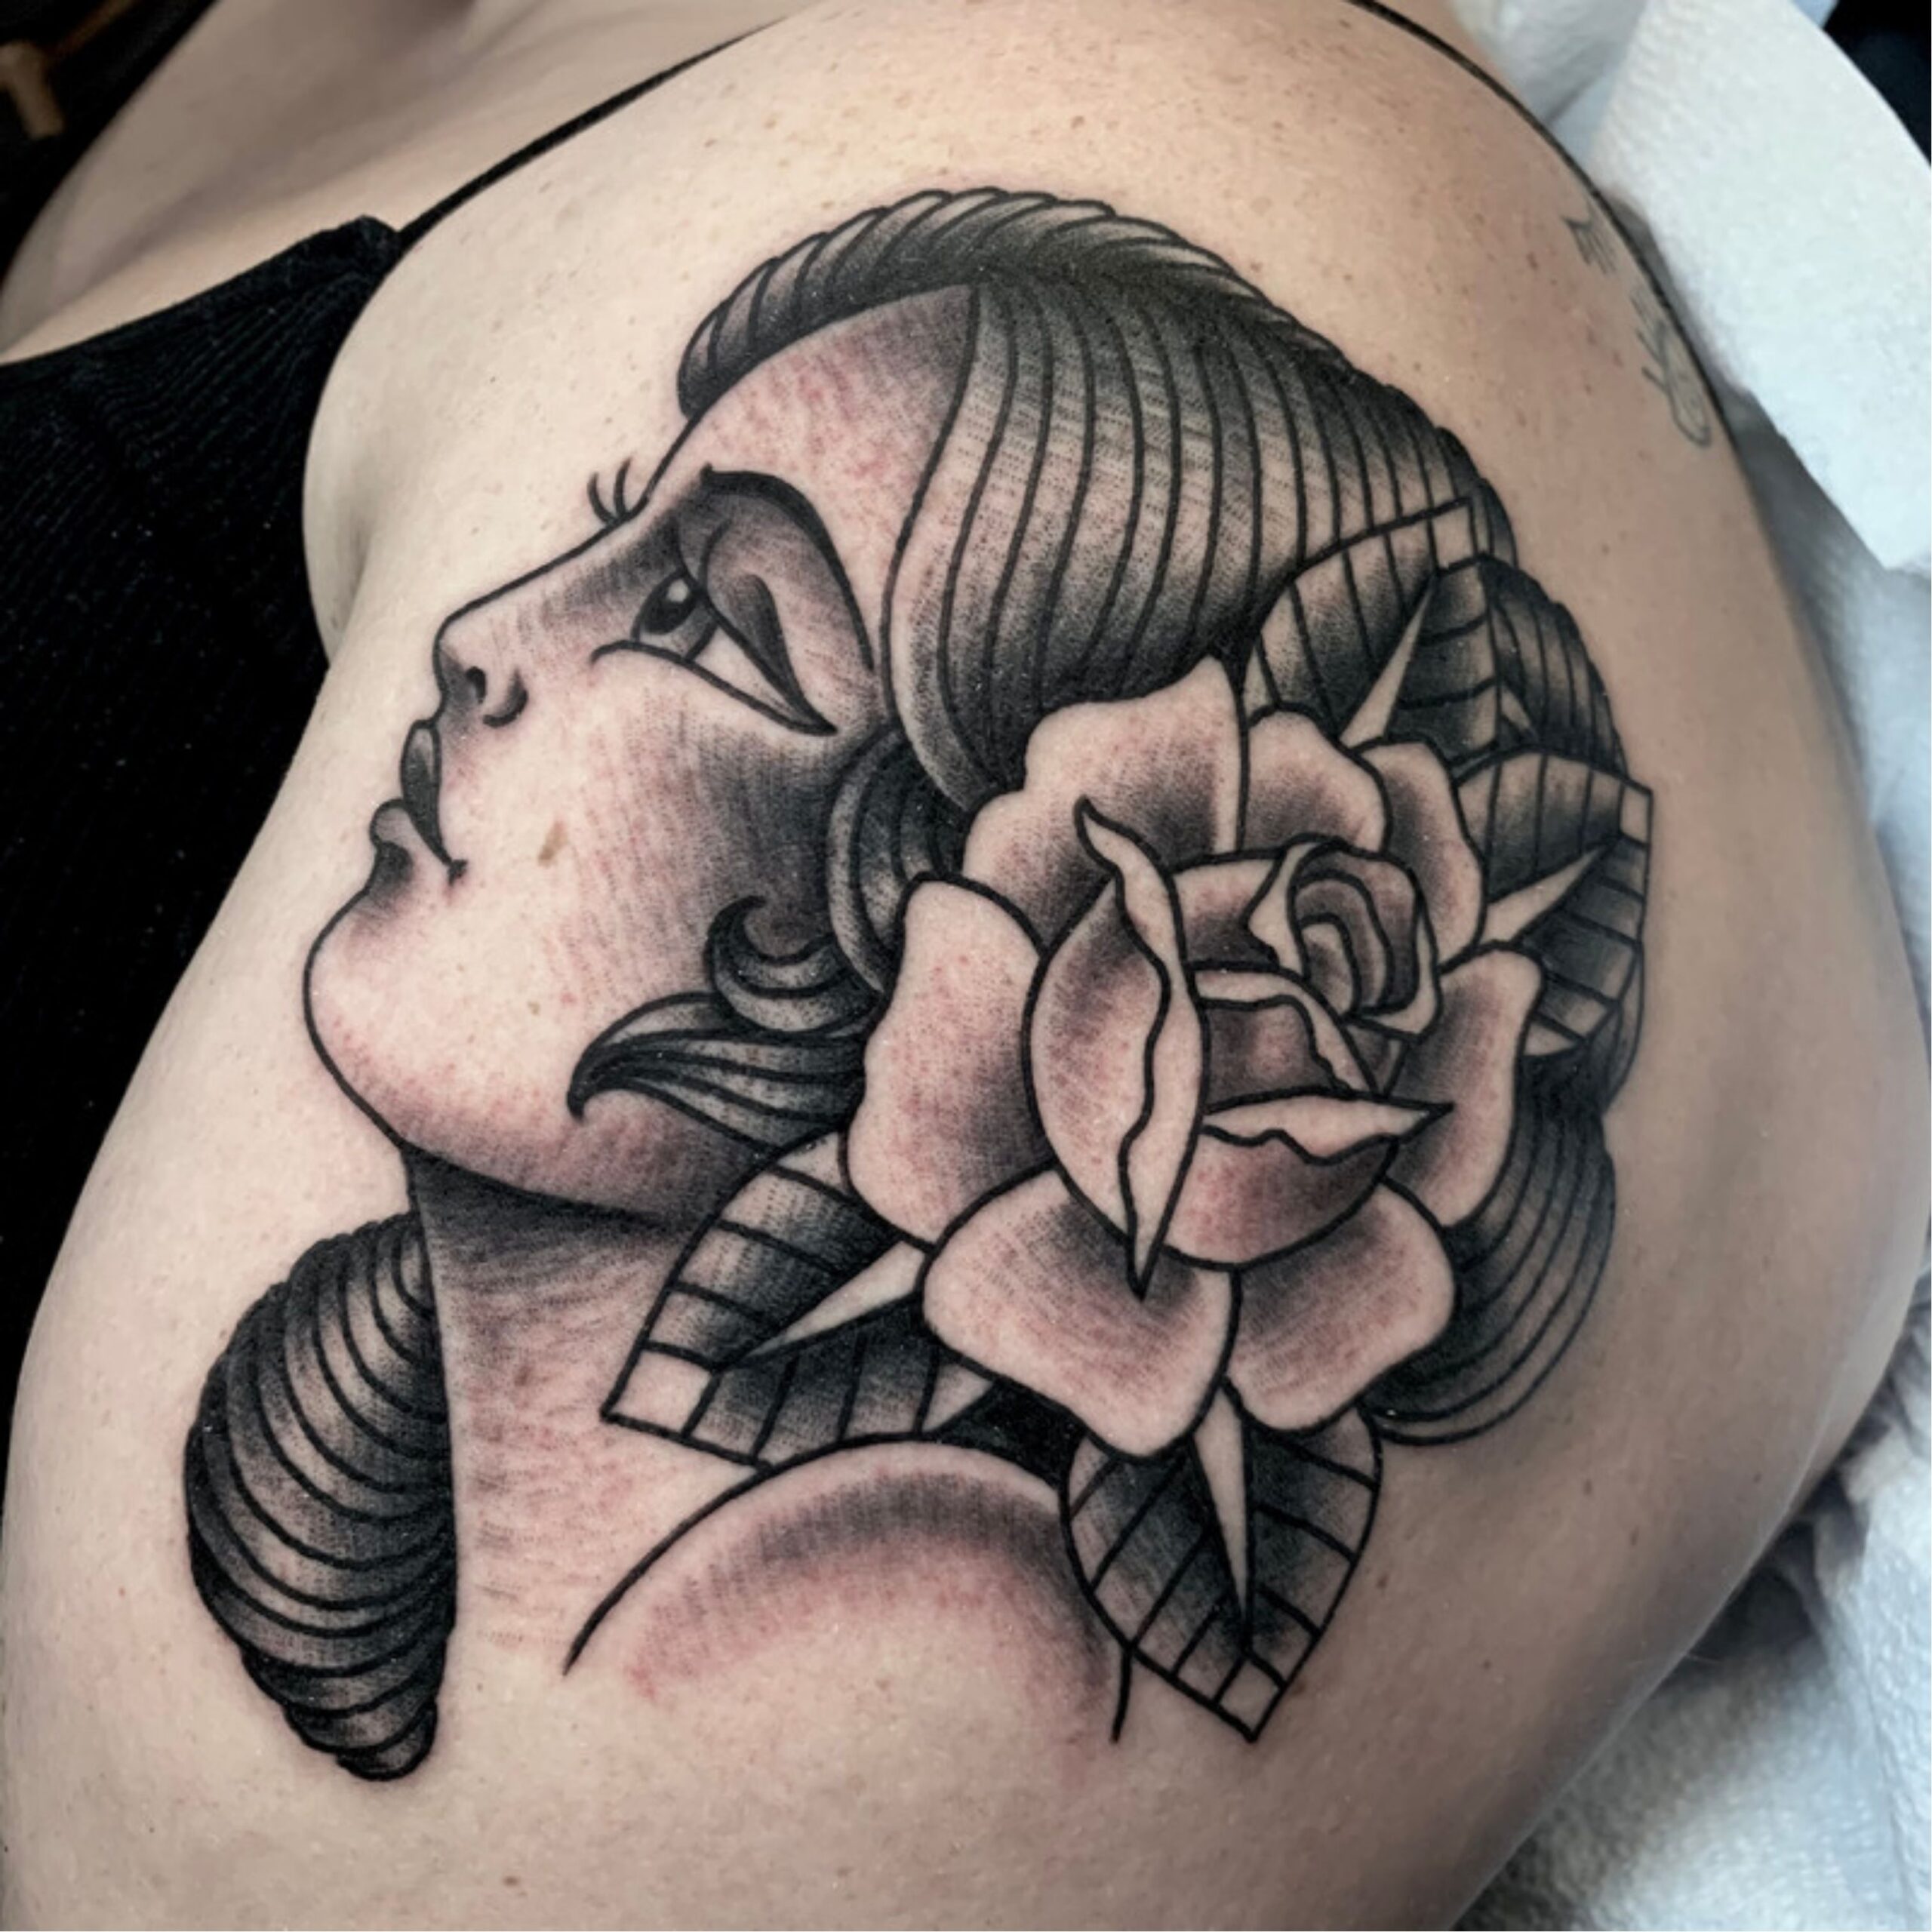 Black and Grey Traditional Lady Head Tattoo by Tom Veling at Small World Tattoo, the best tattoo shops near me.